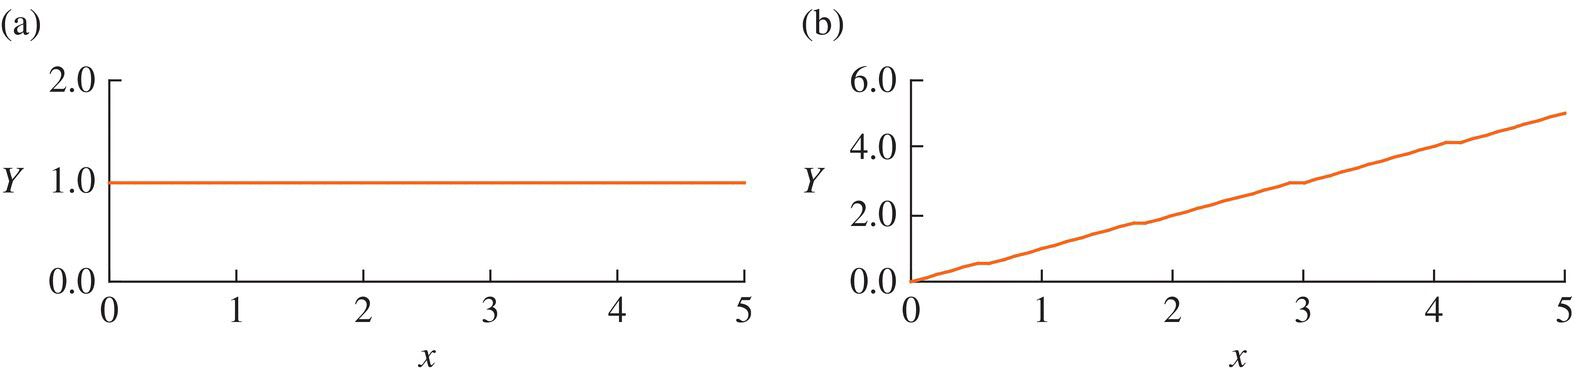 2 Graphs illustrating the first-order eigenvector with a horizontal line at 1.0 of the vertical axis (left) and second-order eigenvector with an ascending line from the origin (right).